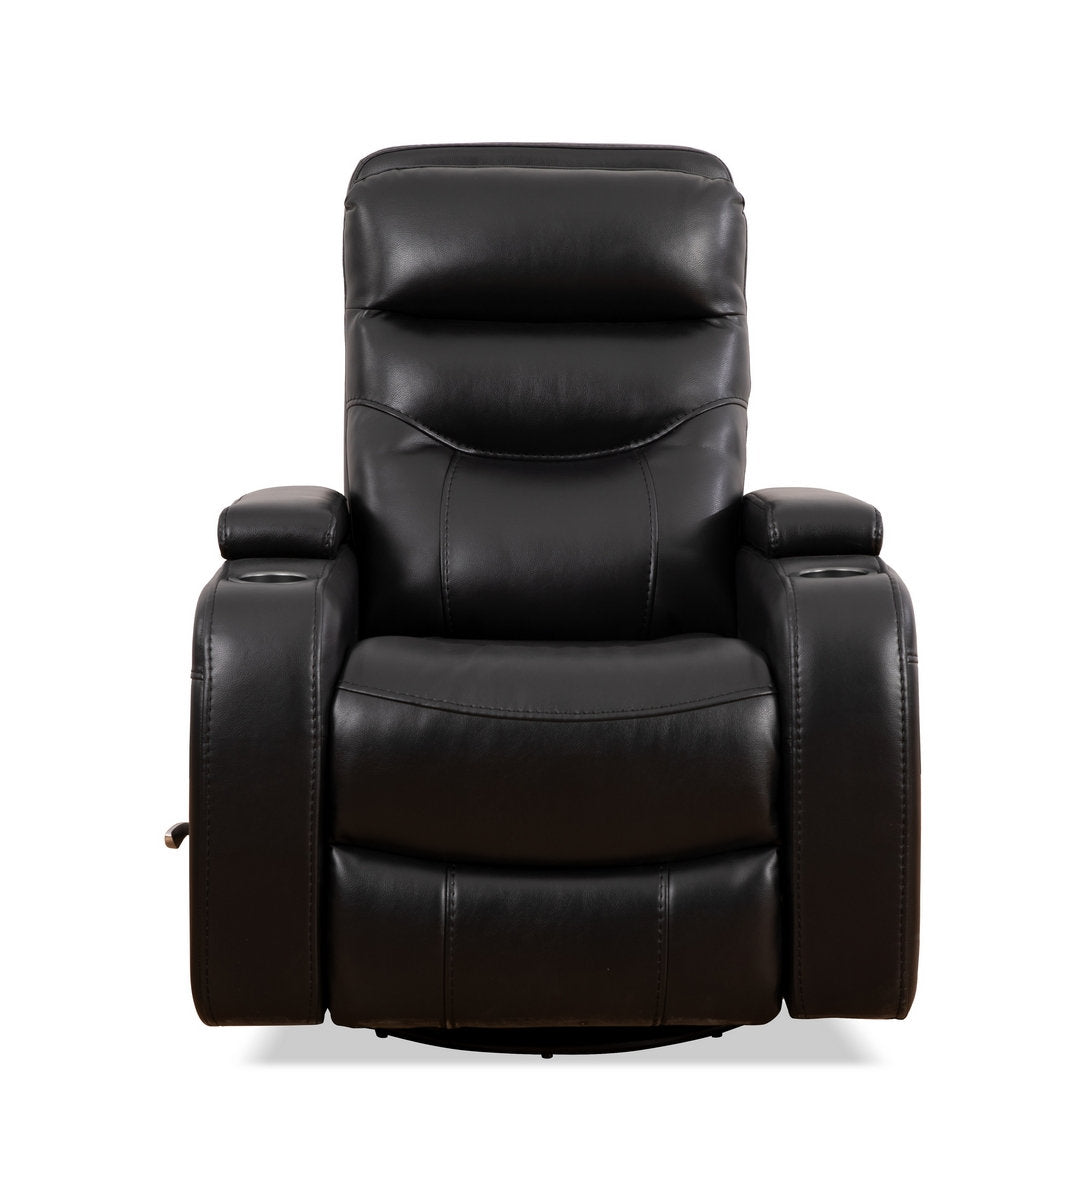 Black PU Swivel Manual Recliner Chair with Solid Hardwood Frame